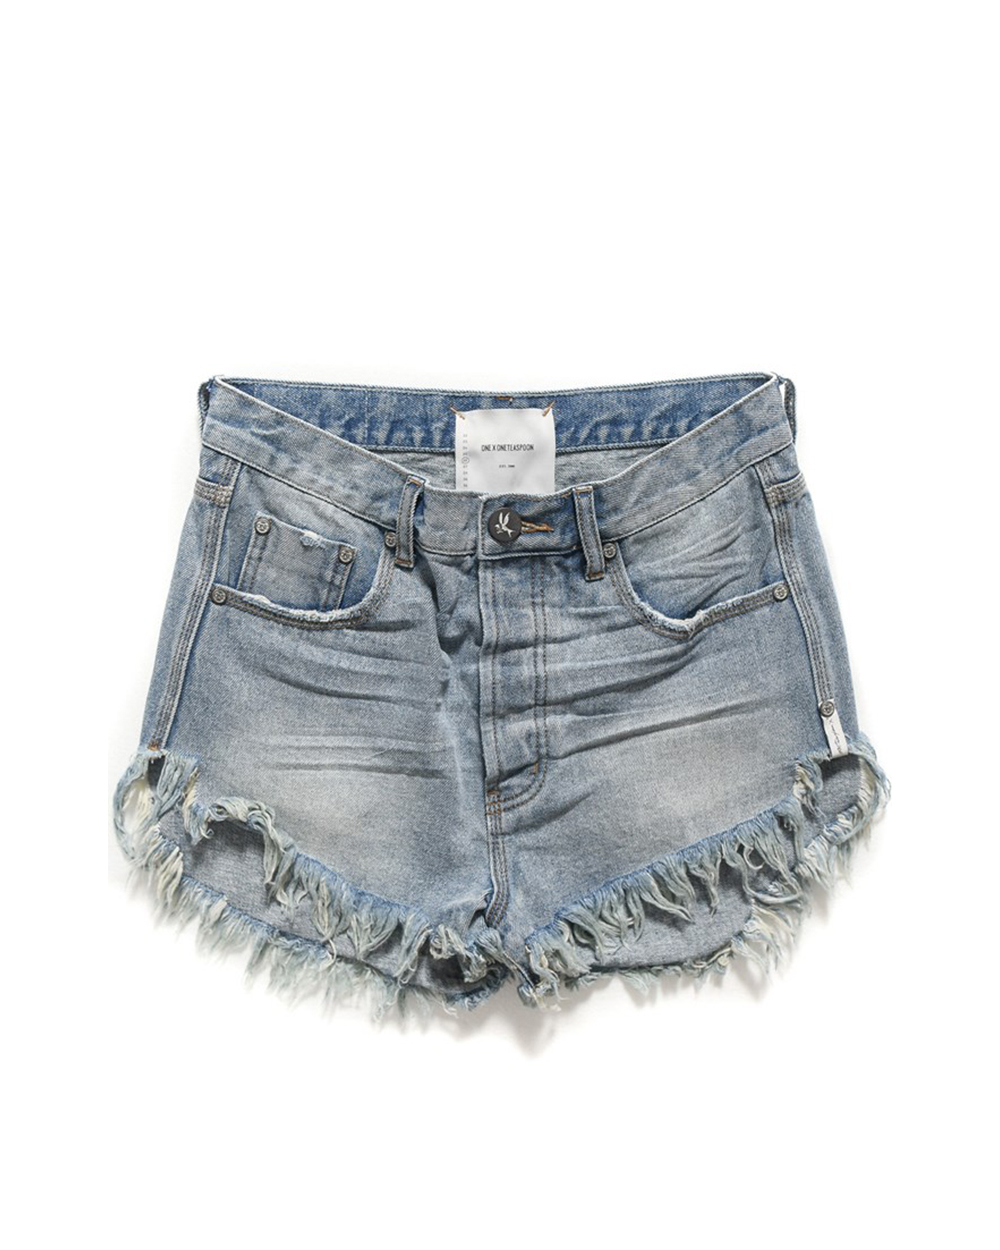 One Teaspoon denim shorts, $149 from Sisters & Co.